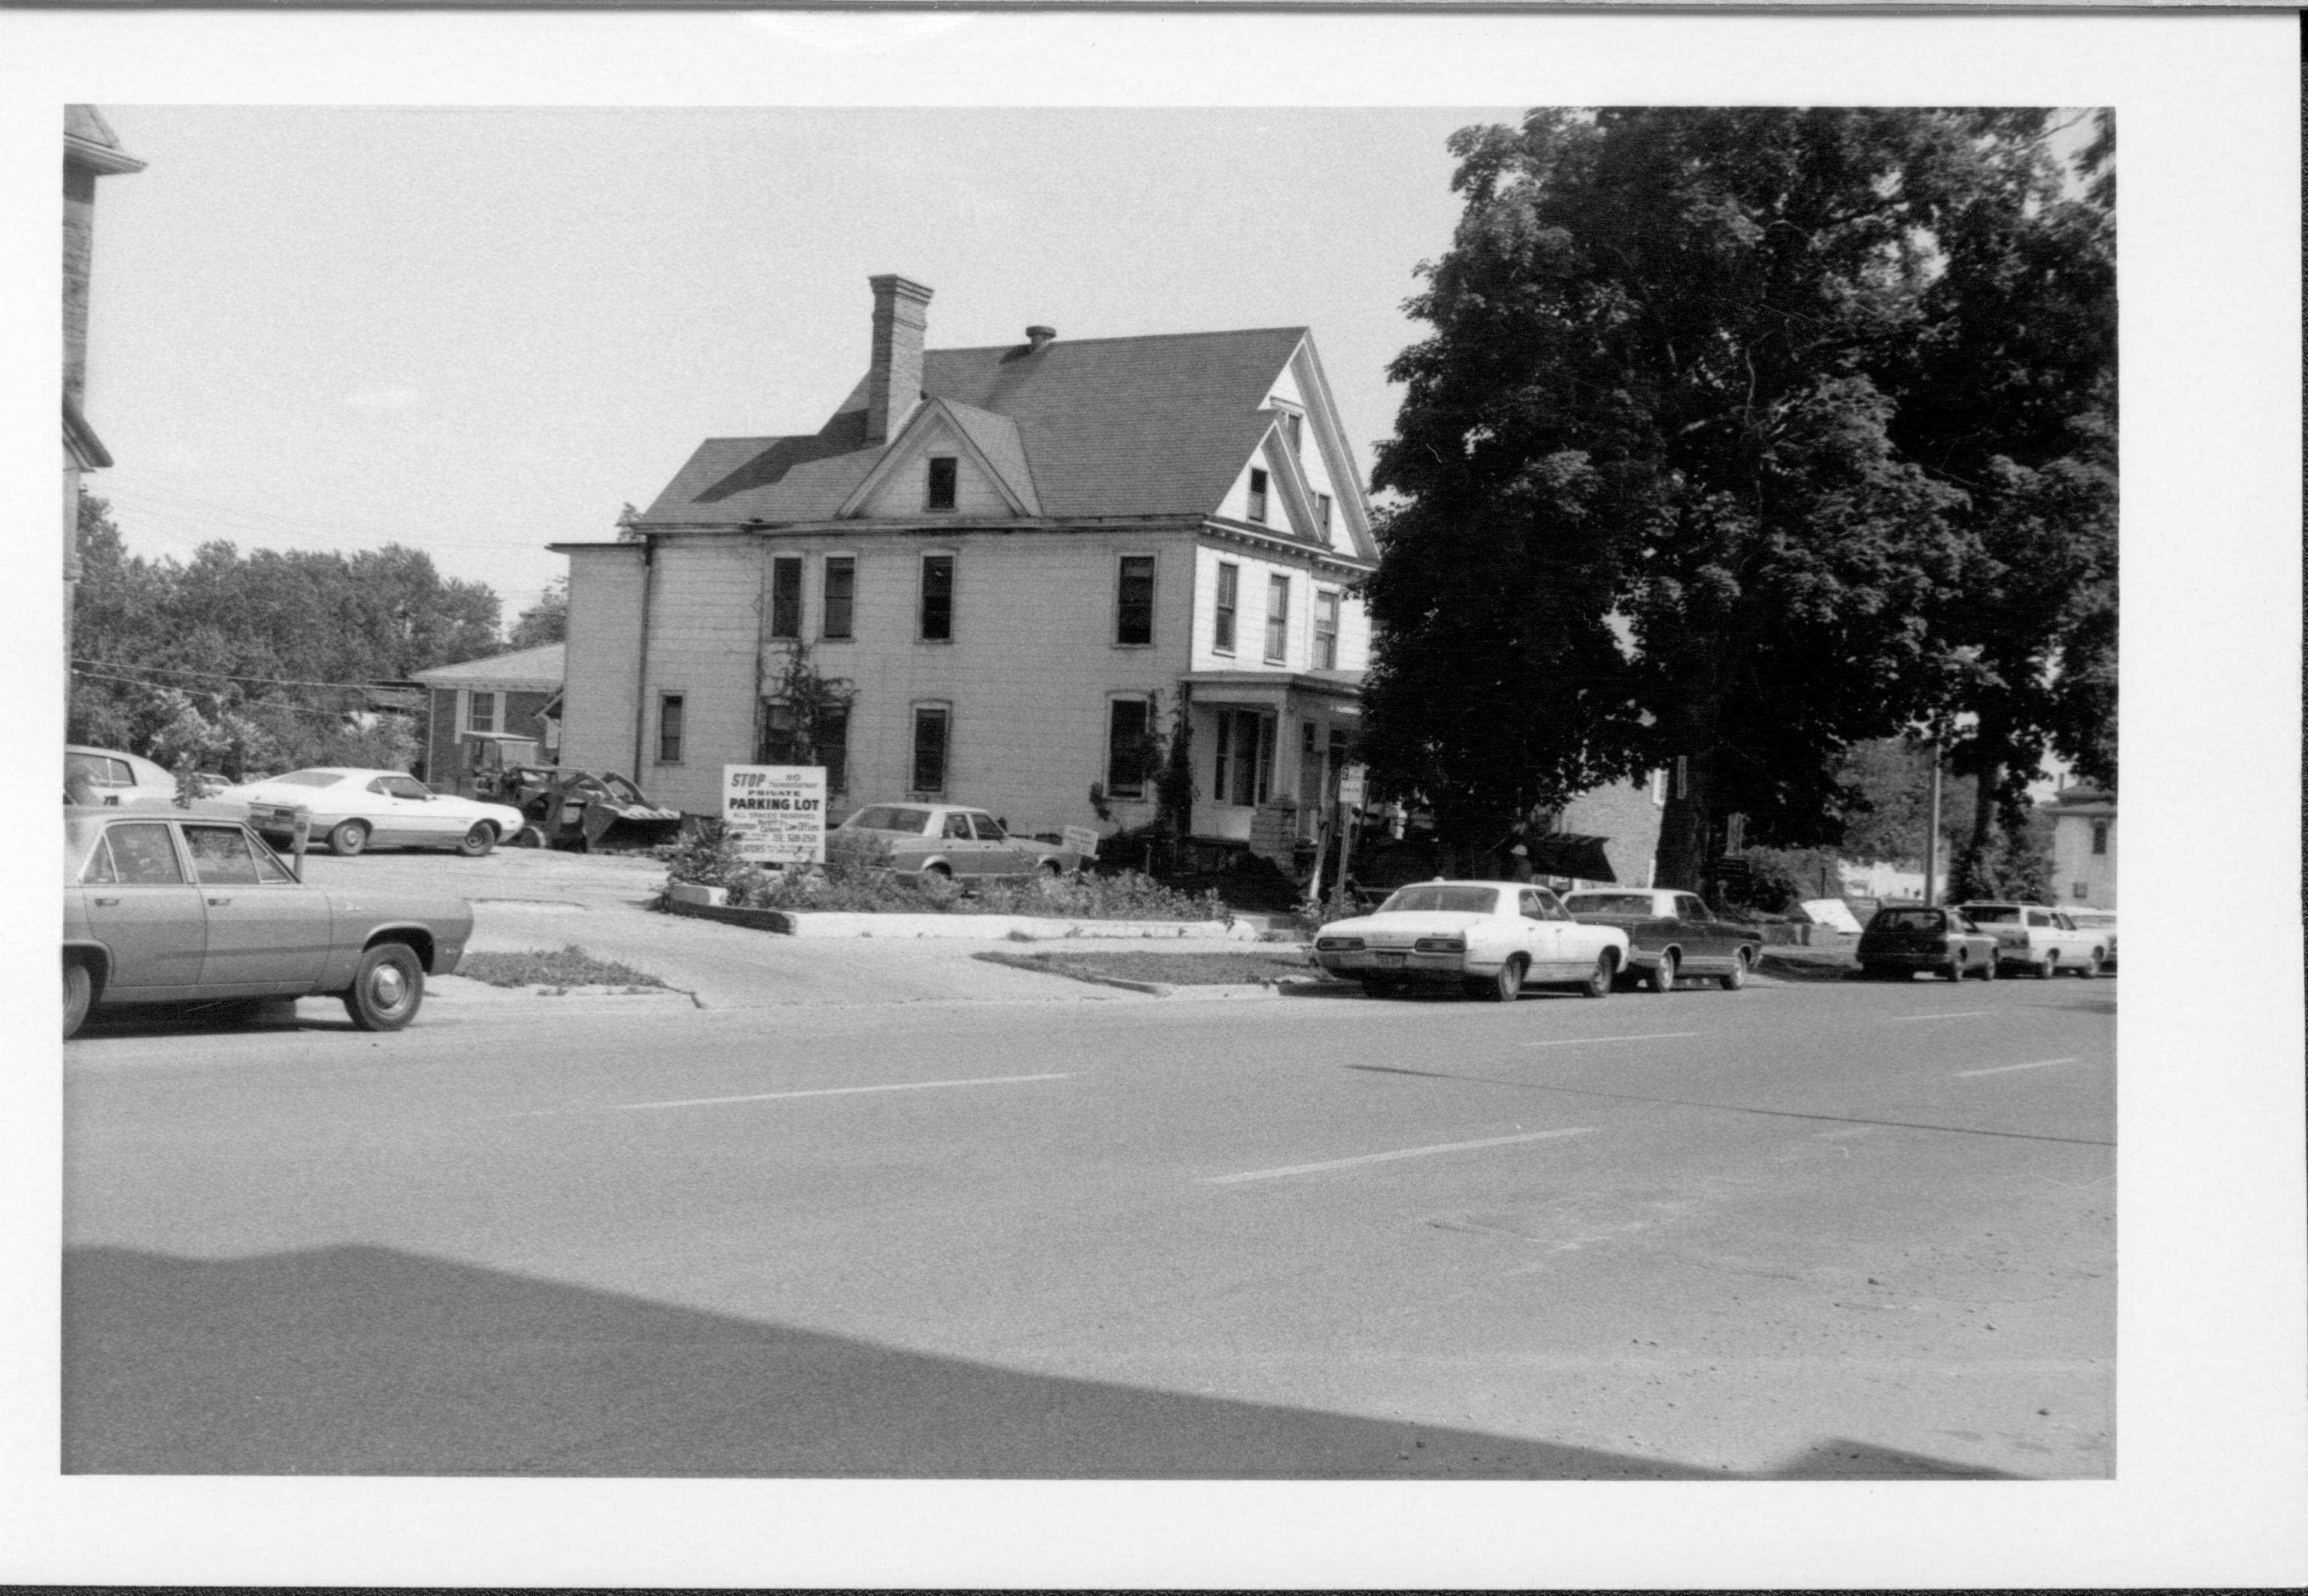 House belonging to Eugene McNally, Block 7, Lot 5 along 7th Street in area where Visitor Center is now.  Grace Lutheran Church parking lot is on left.  7th Street in foreground.  Scoop seen near house is clearing debris from house being razed. Looking southeast McNally, Grace Lutheran Church, 7th Street, Visitor Center